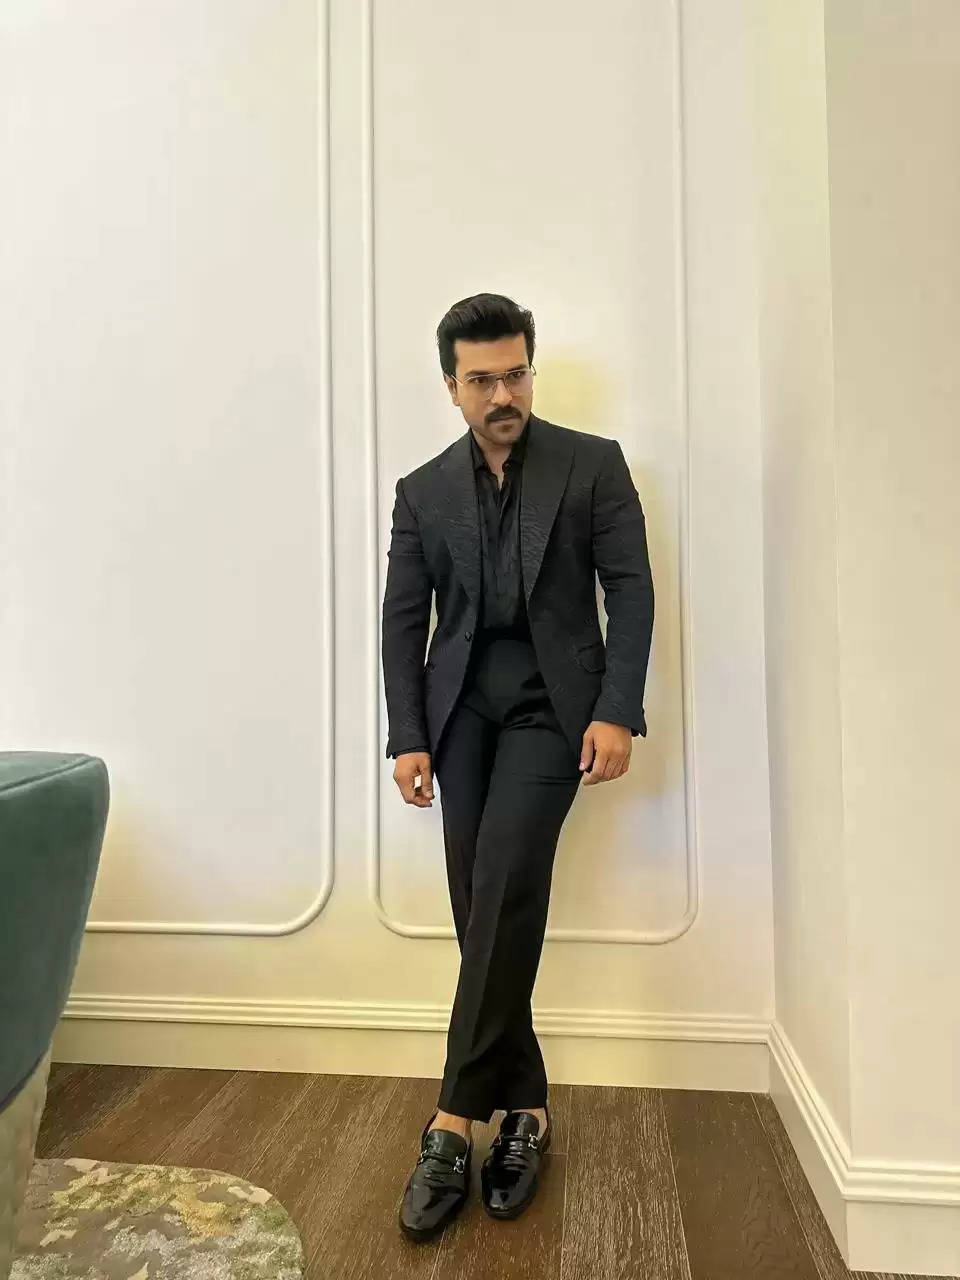 Renowned Vels University to honor Global Star Ram Charan with a Doctorate